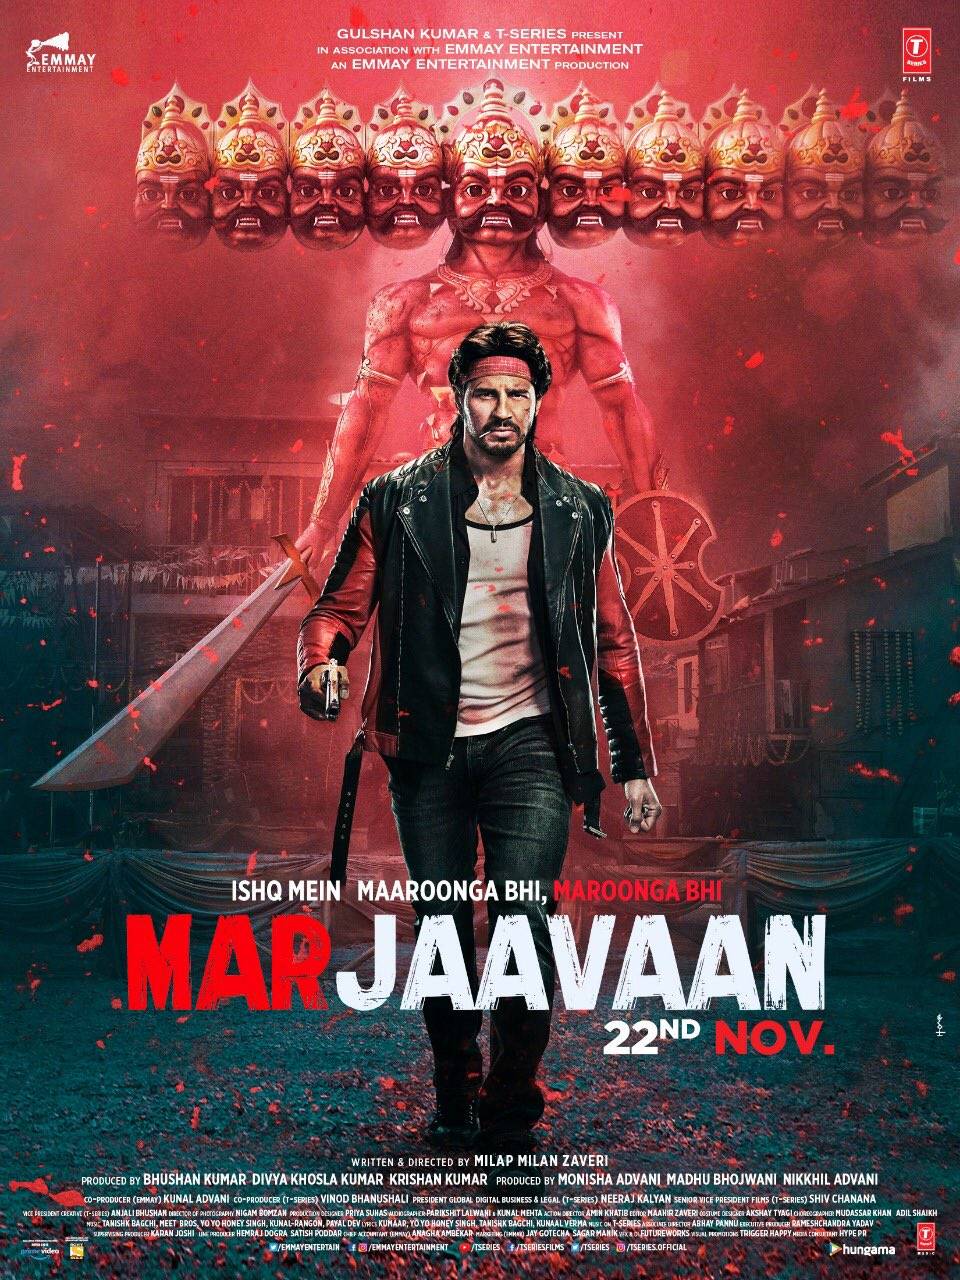 Marjaavaan' First Look Posters: Sidharth Malhotra And Riteish Deshmukh Are Set For A Face Off In This Revenge Saga. Hindi Movie News Of India